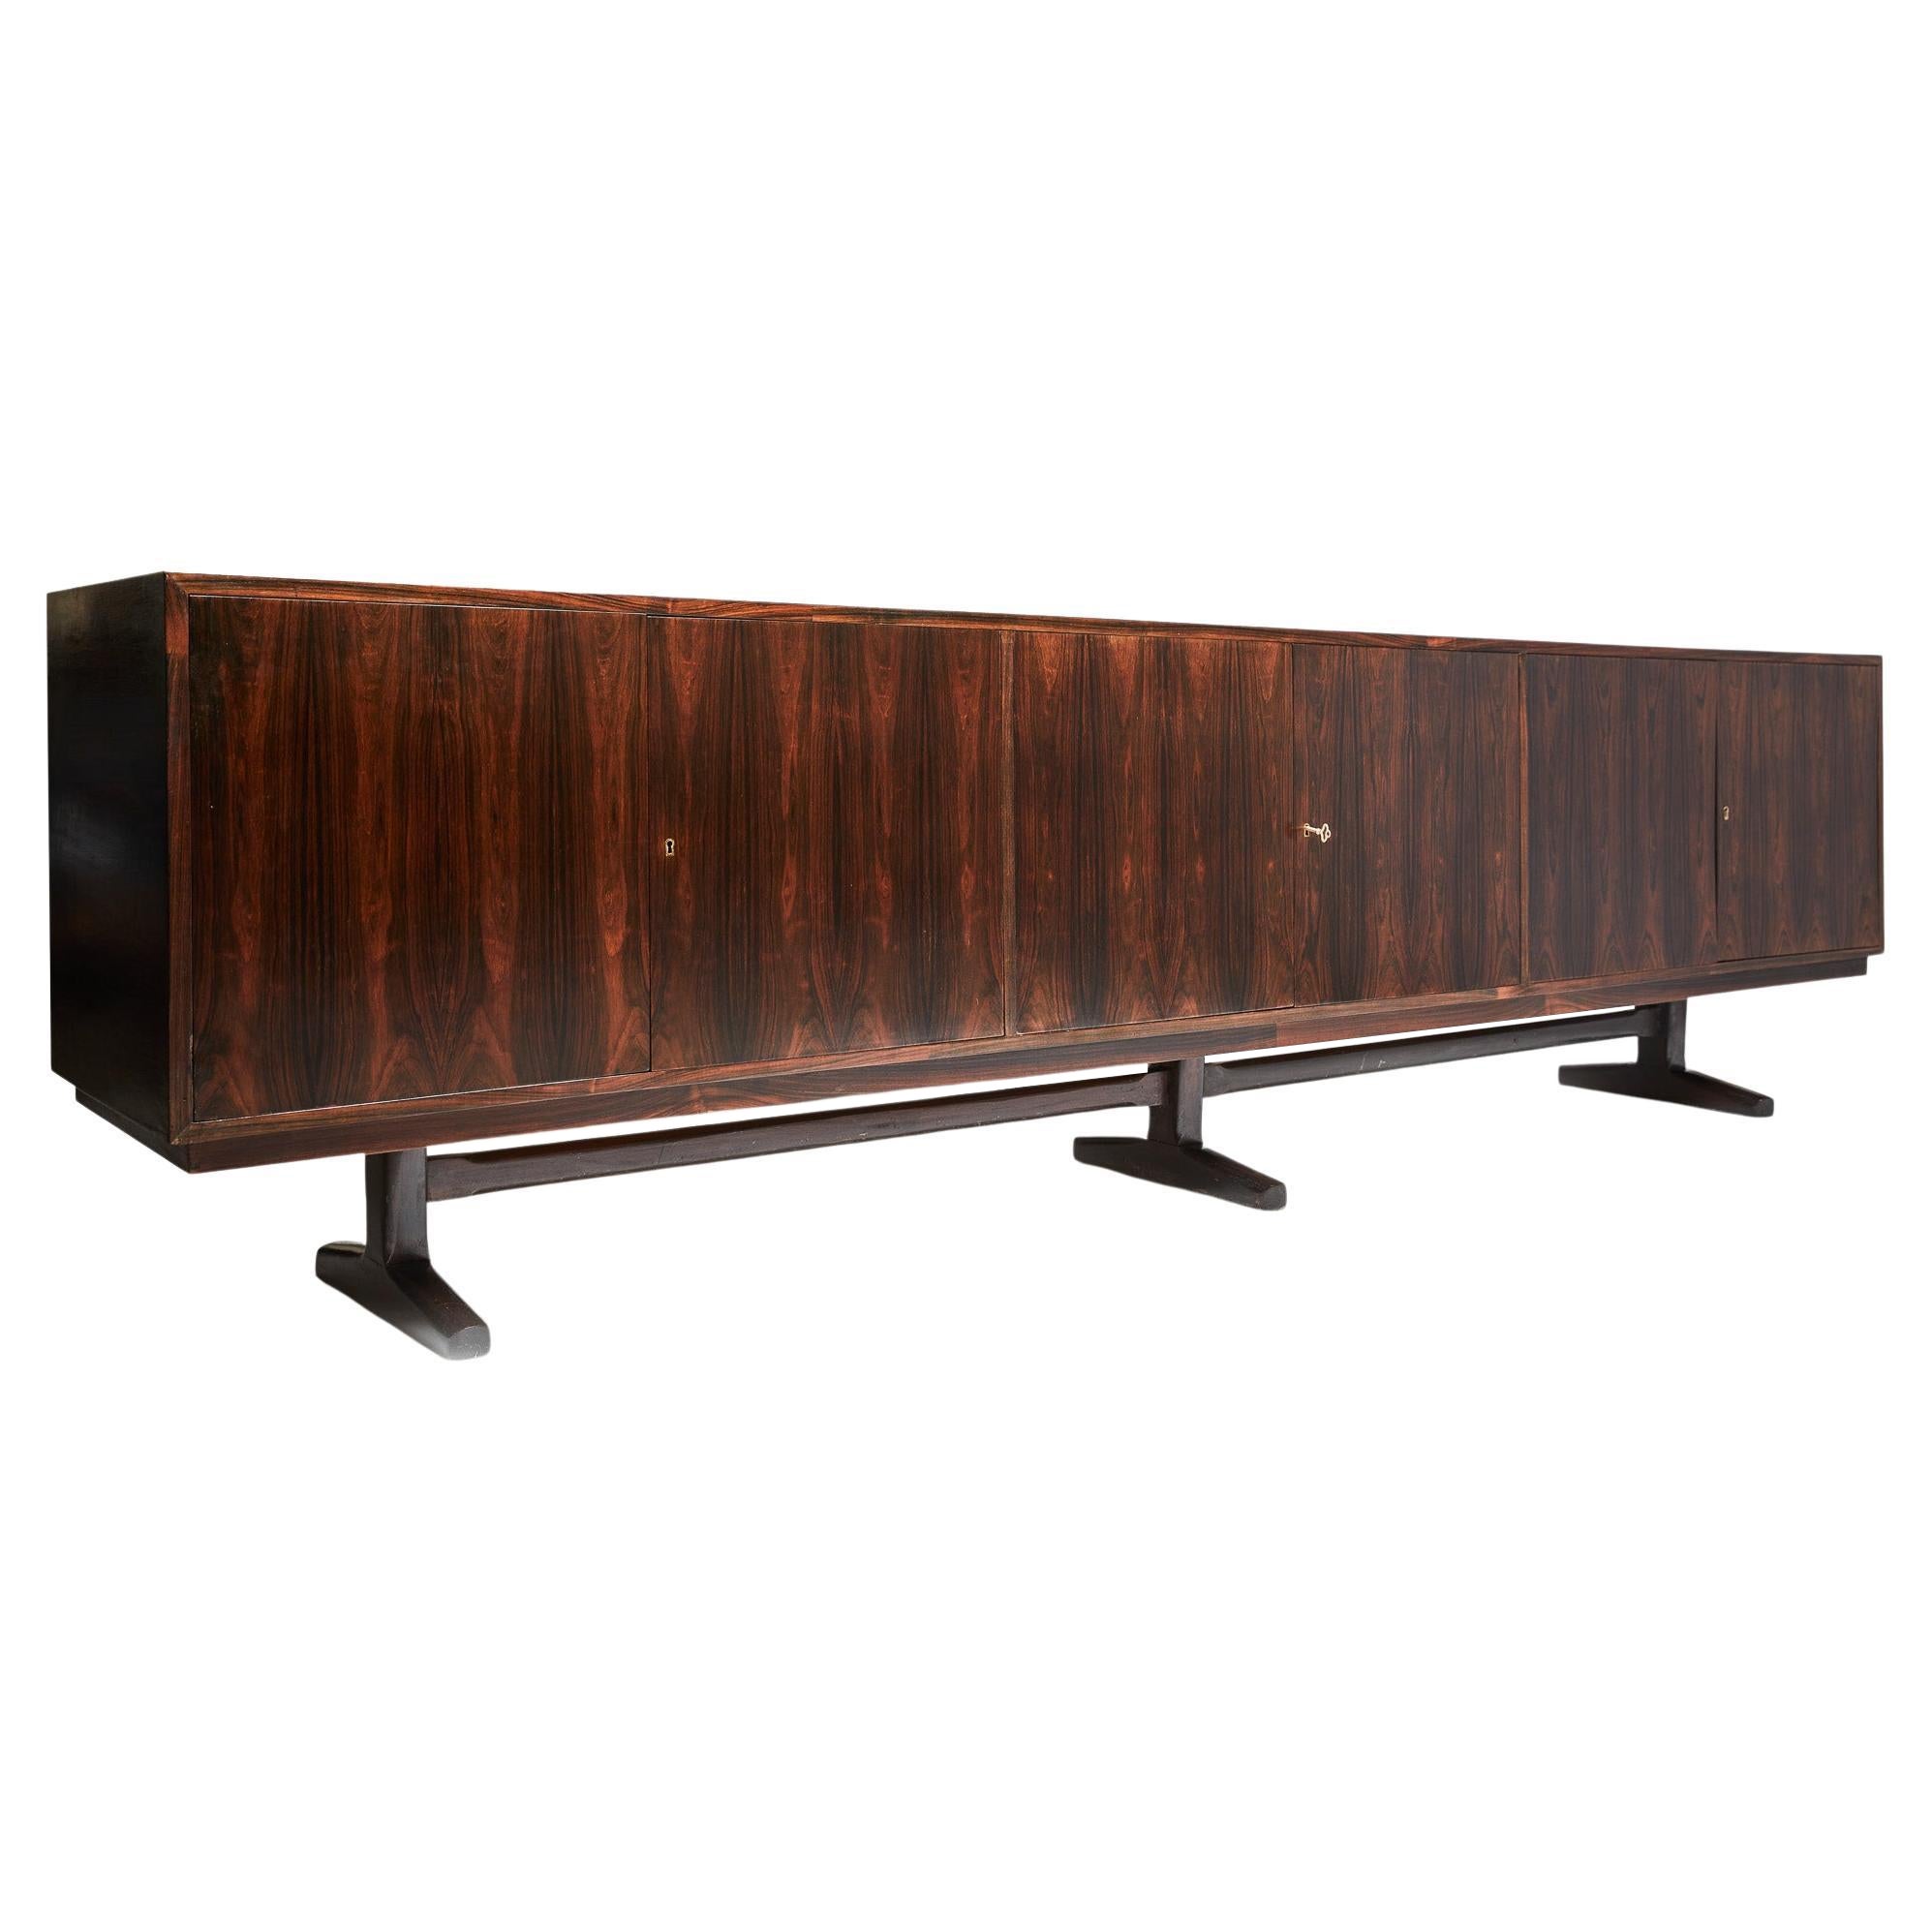 Available today, this magnificent Brazilian Modern Credenza from Novo Rumo is stately and stunning!

The Credenza is executed in Brazilian Rosewood leaf, as known as Jacaranda, and solid Jacaranda structure. The credenza is composed of three feet,